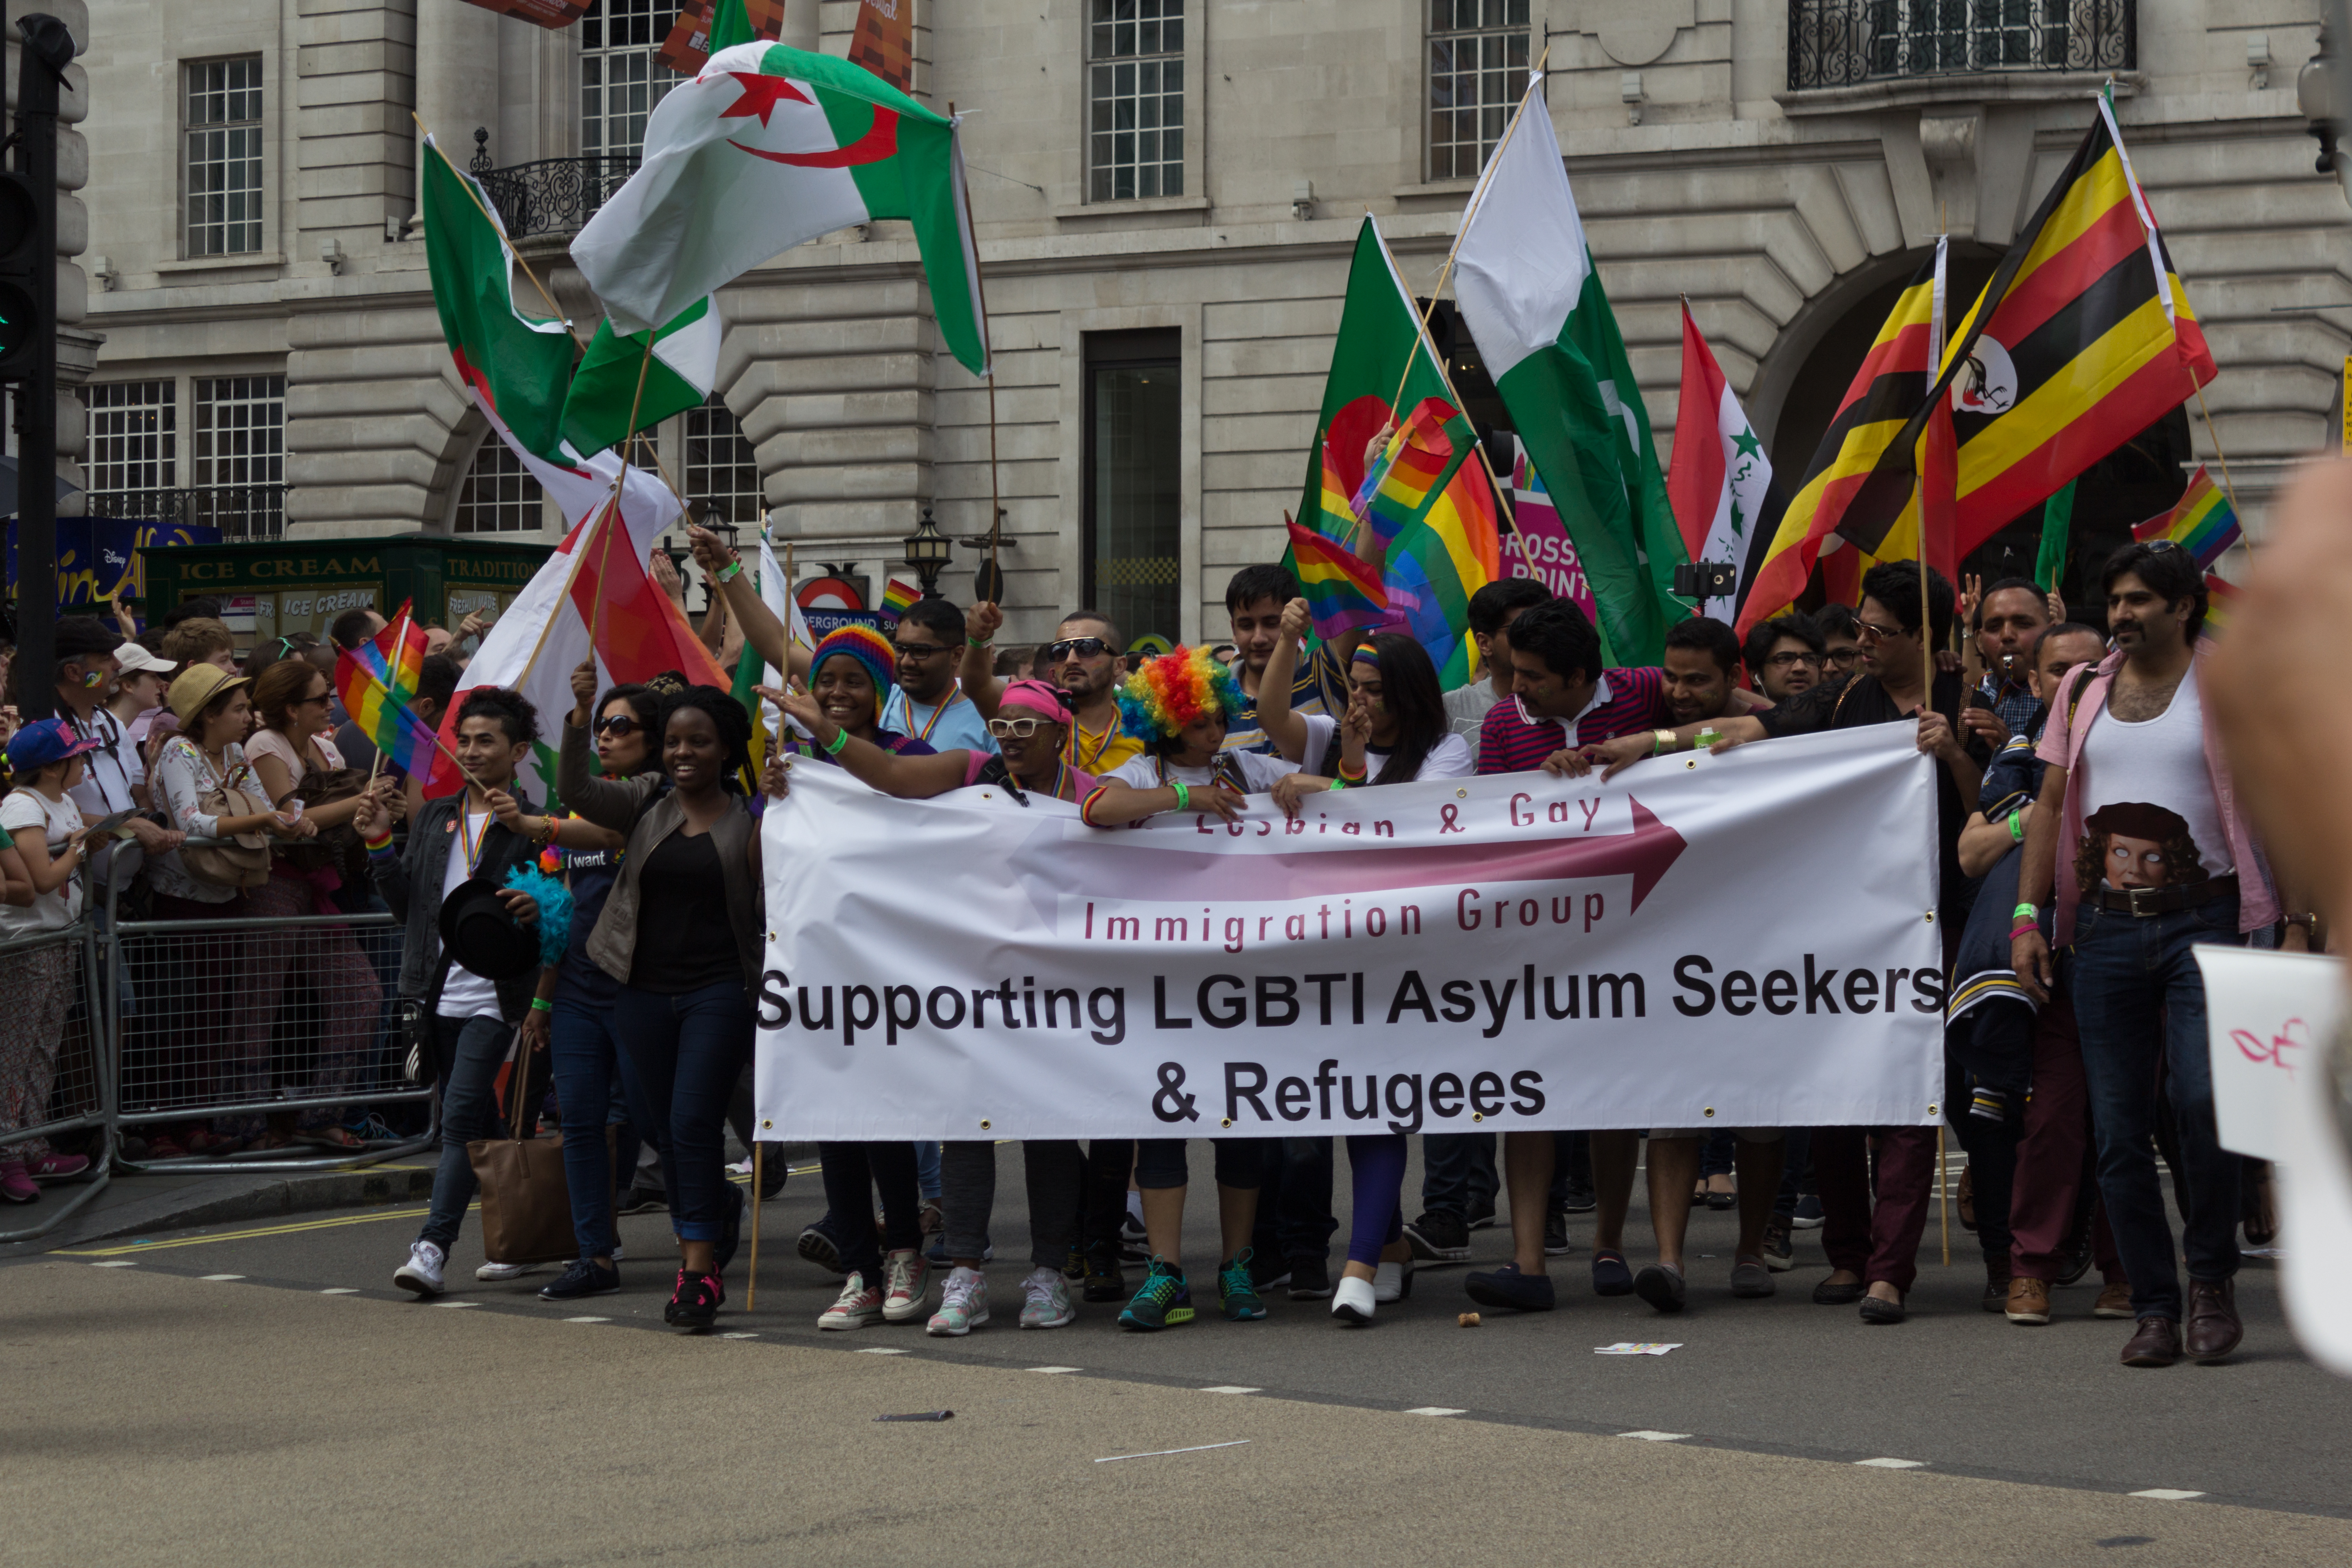 Activists holding a banner that reads, “Lesbian and Gay Immigration Group: Supporting LGBTI Asylum Seekers and Refugees”